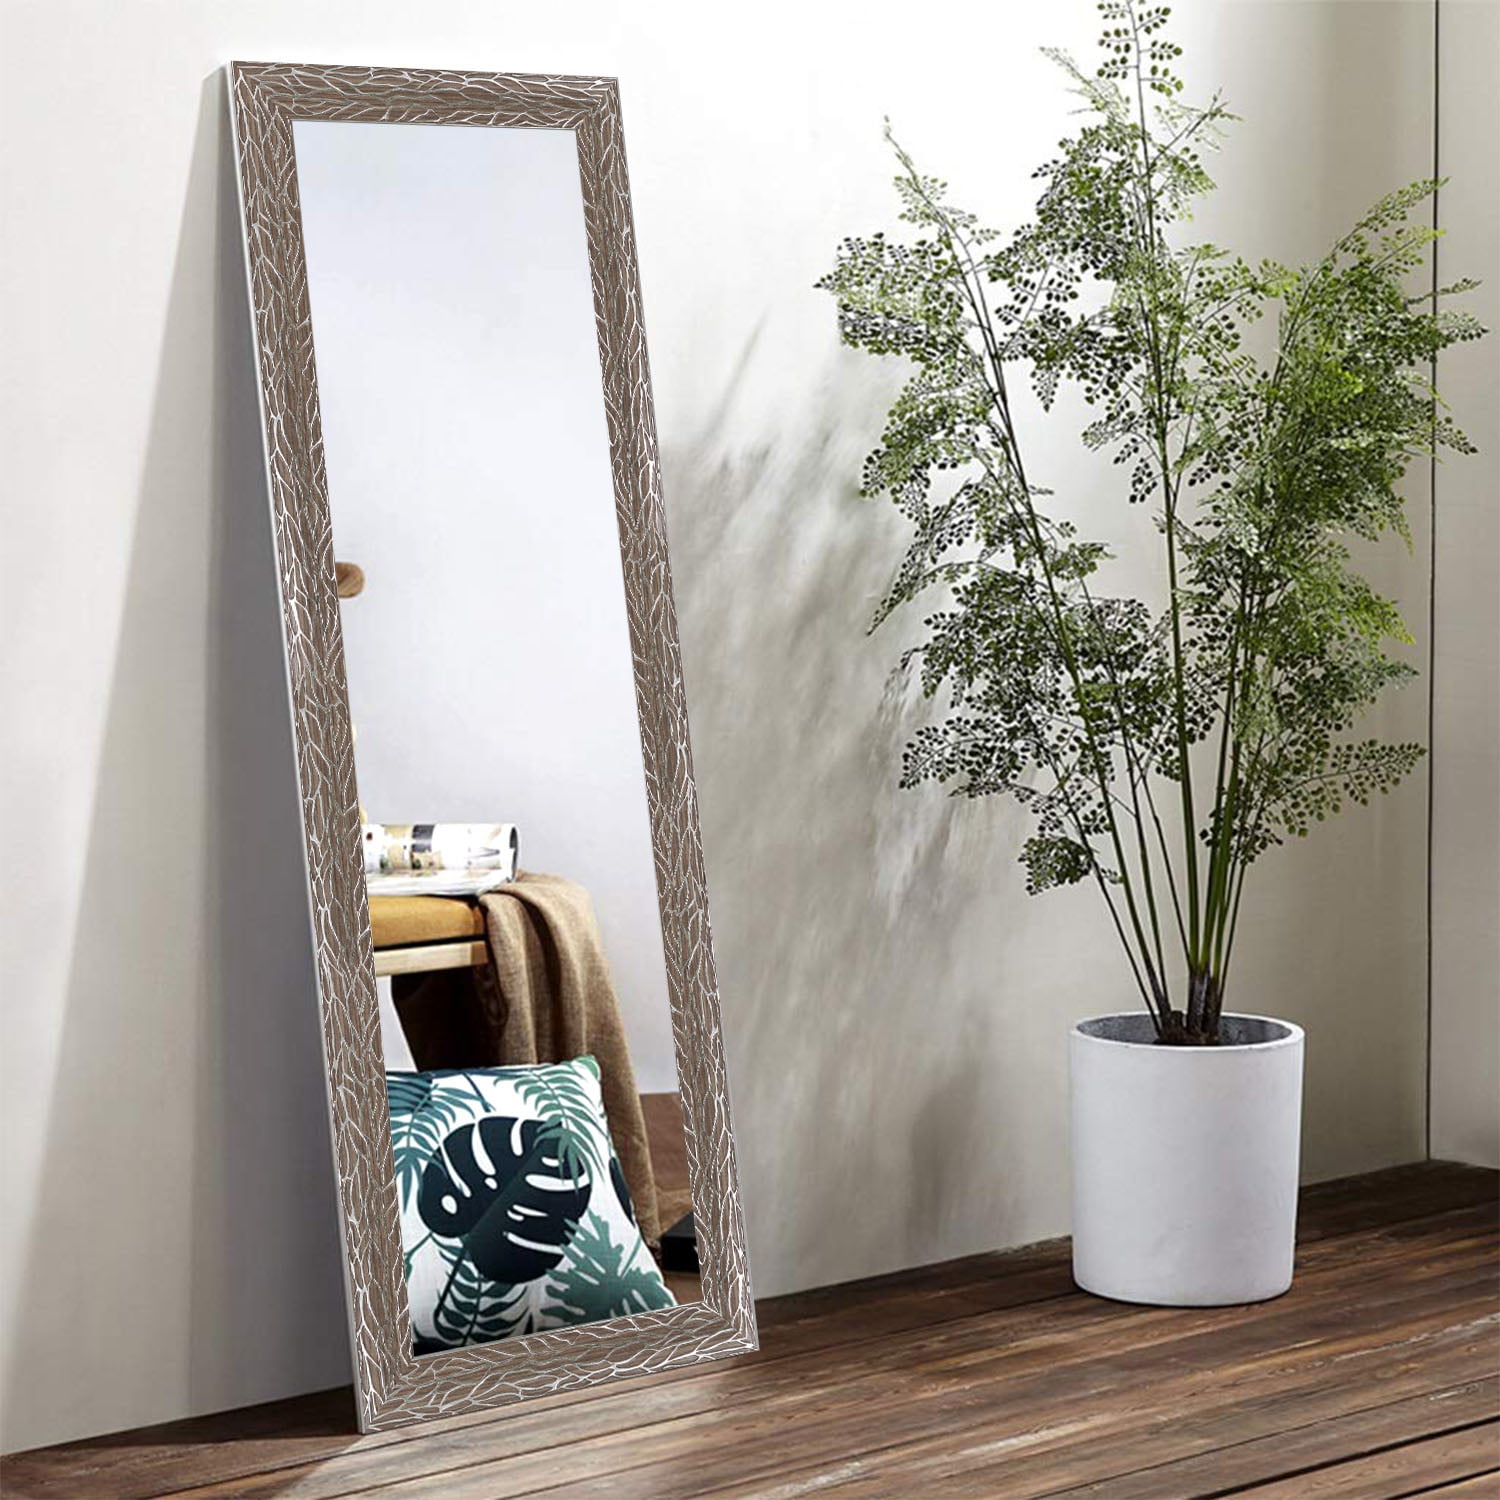 Full Length Mirror Floor Mirror with Standing Holder Hanging/Leaning